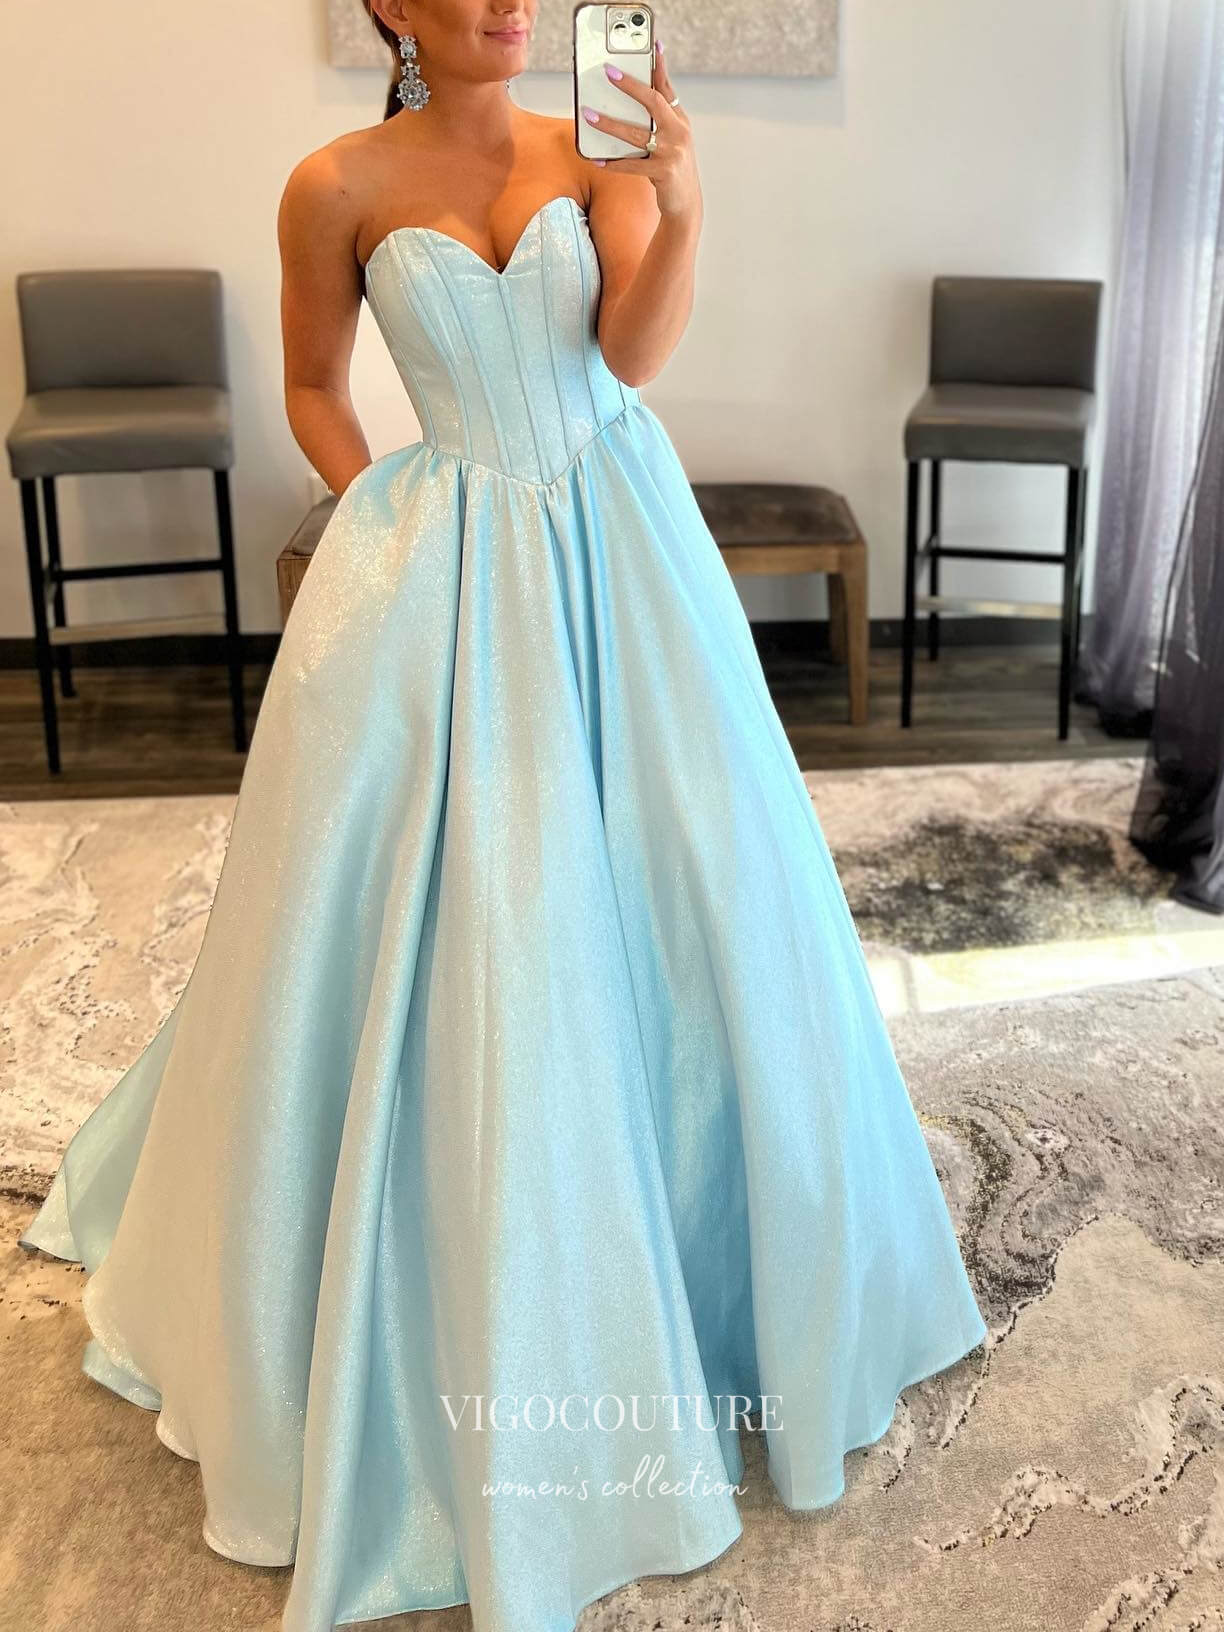 vigocouture-Light Blue Sweetheart Neck Prom Dresses With Pockets Sparkly Satin Evening Dresses 21567-Prom Dresses-vigocouture-Light Blue-US2-